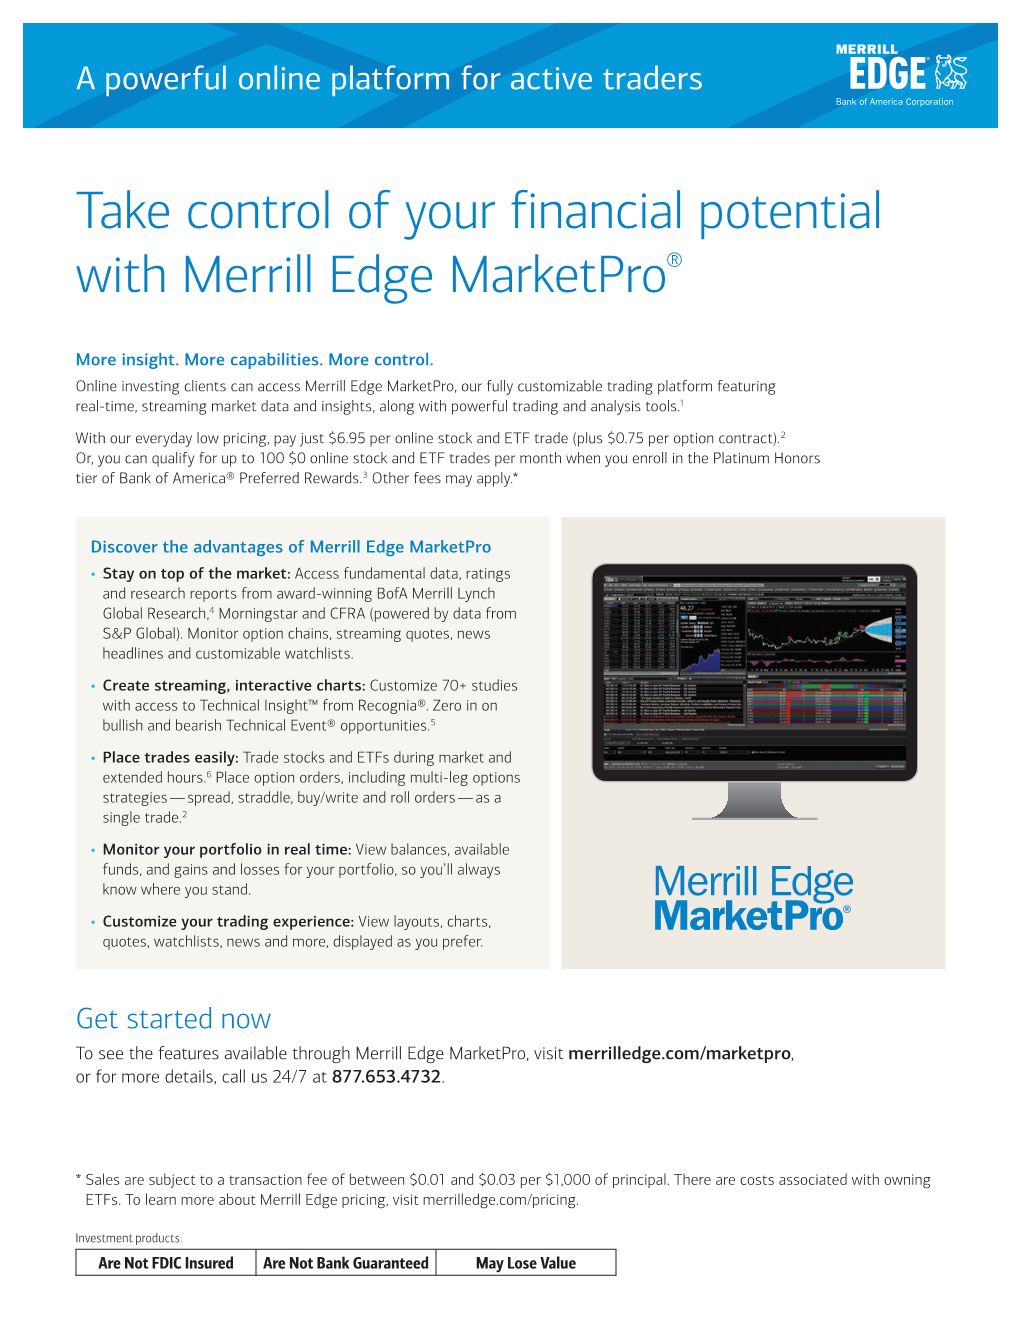 Take Control of Your Financial Potential with Merrill Edge Marketpro®